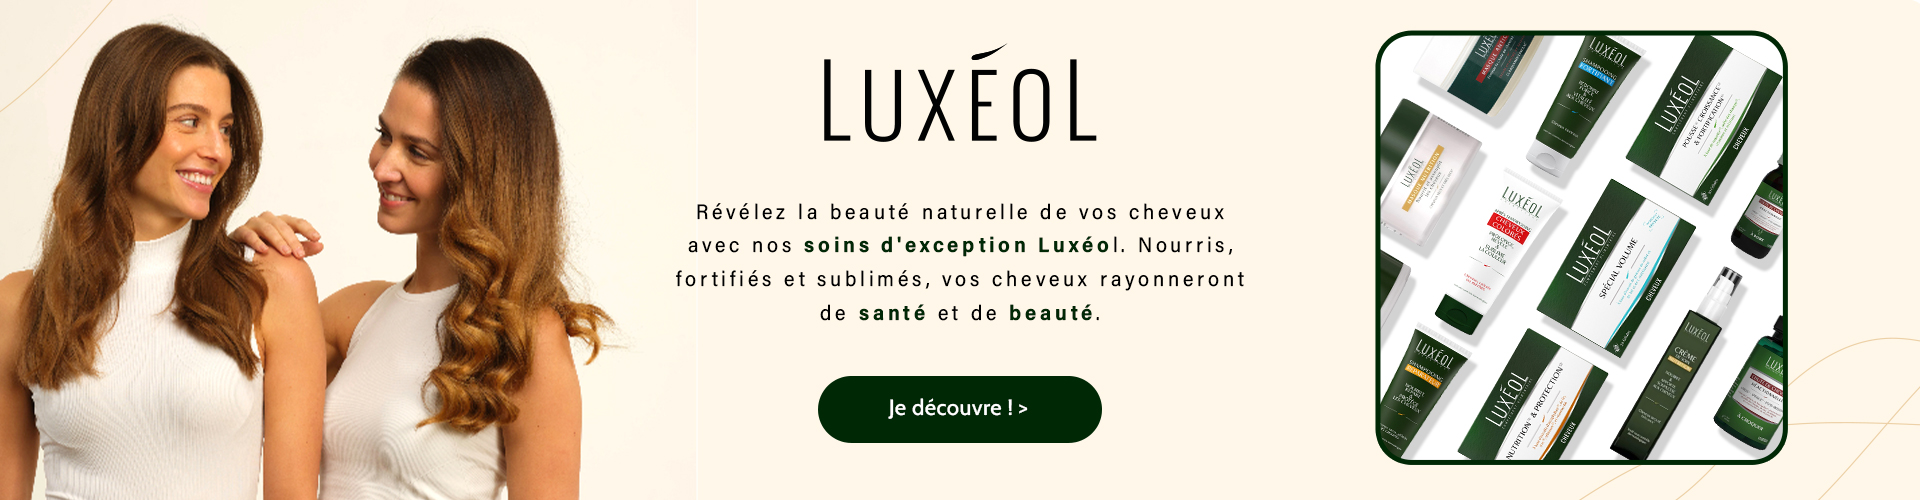 Luxeol Cheveux MOBILE